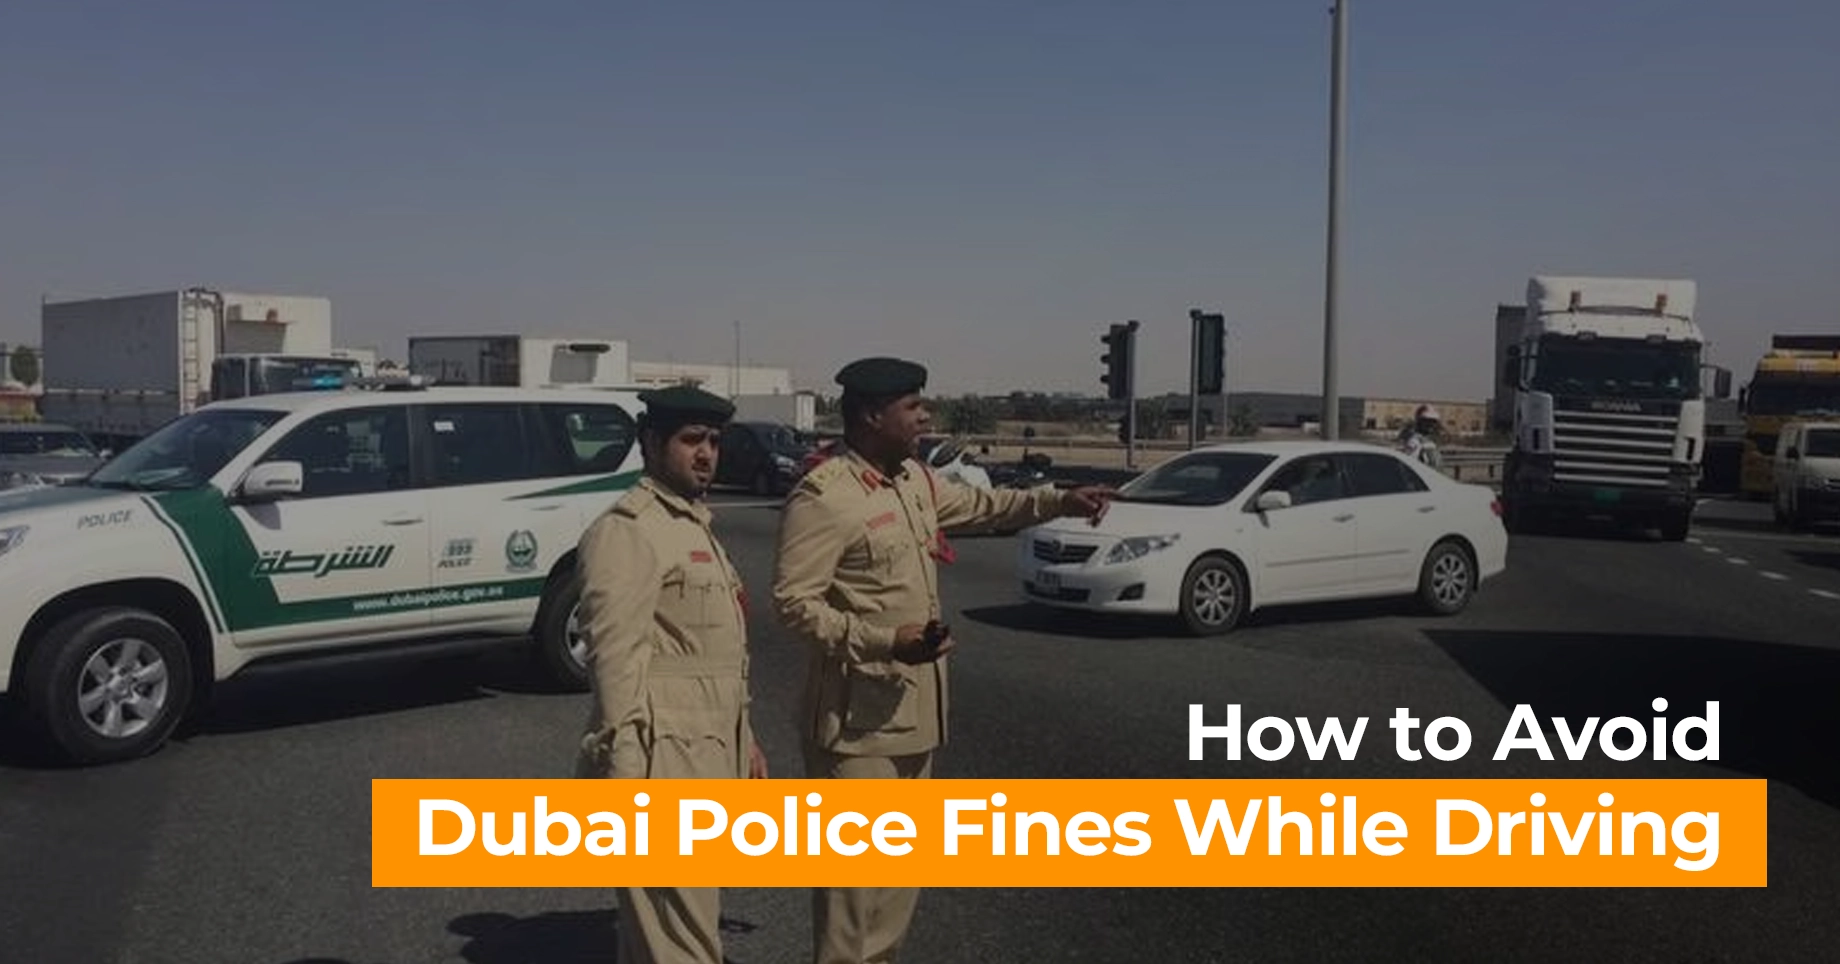 How to Avoid Dubai Police Fines While Driving